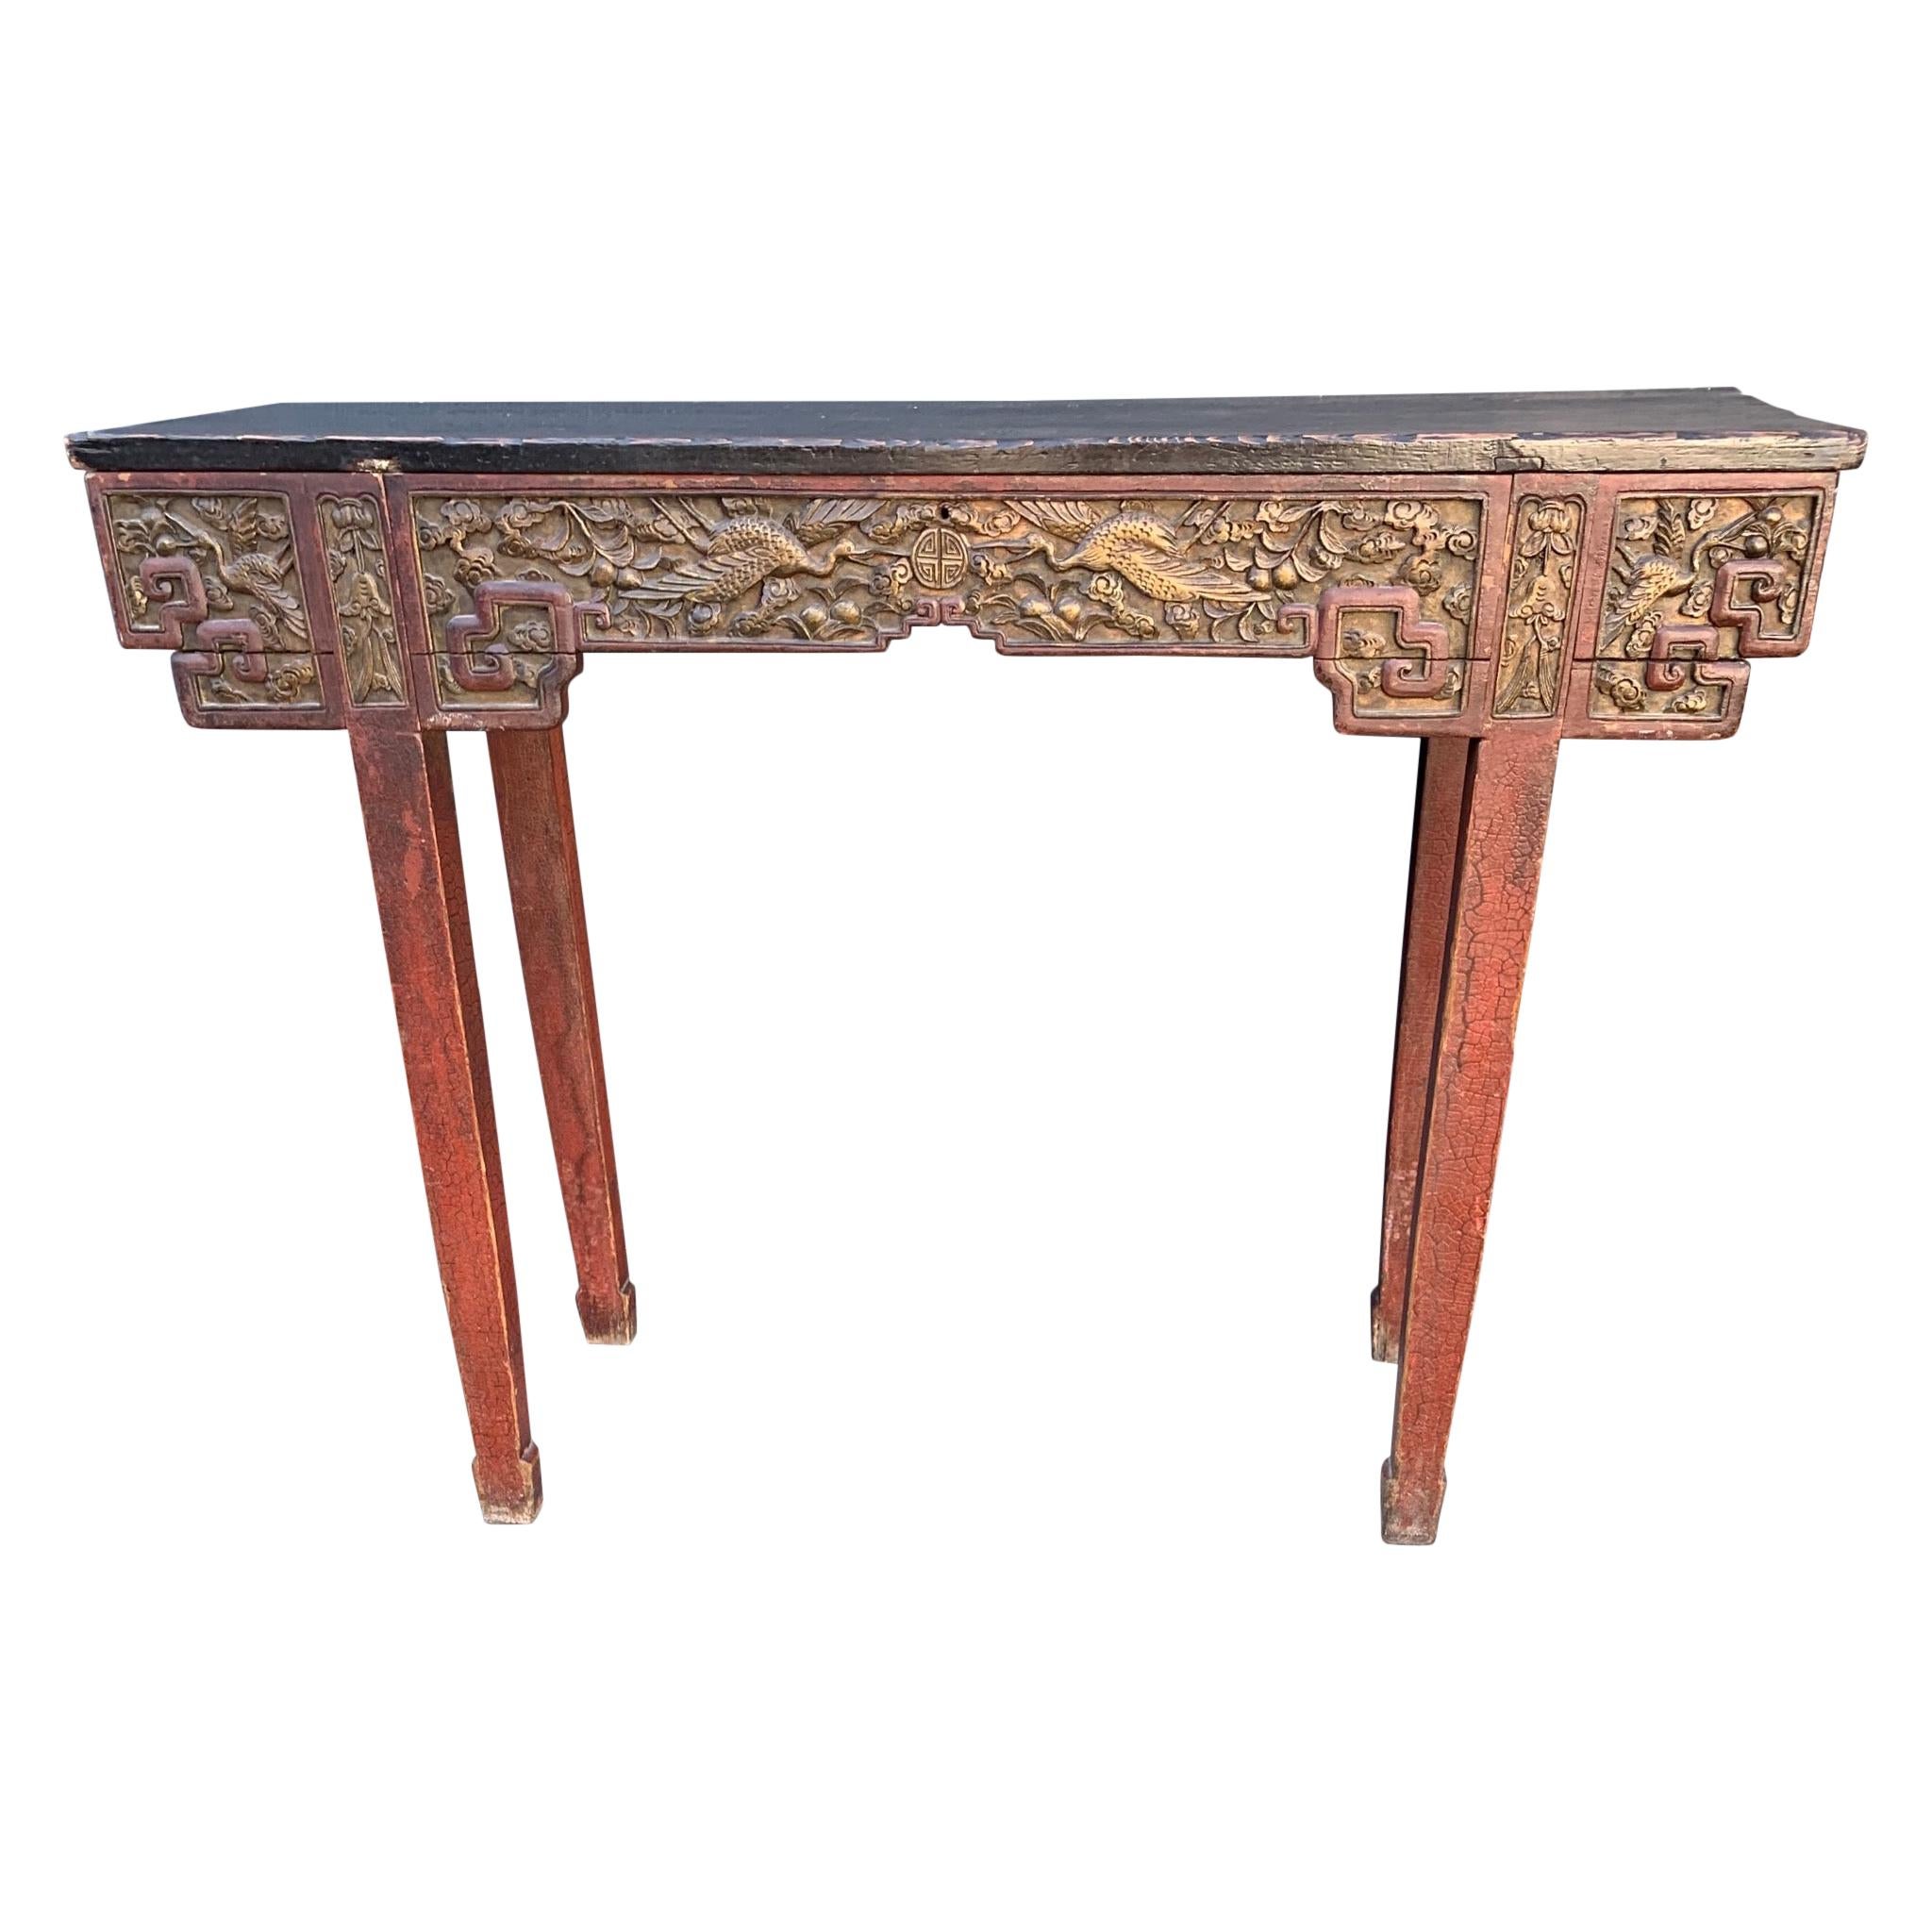 Antique Timeless Design Chinese Altar Table with Meaningful Crane Bird Carvings 